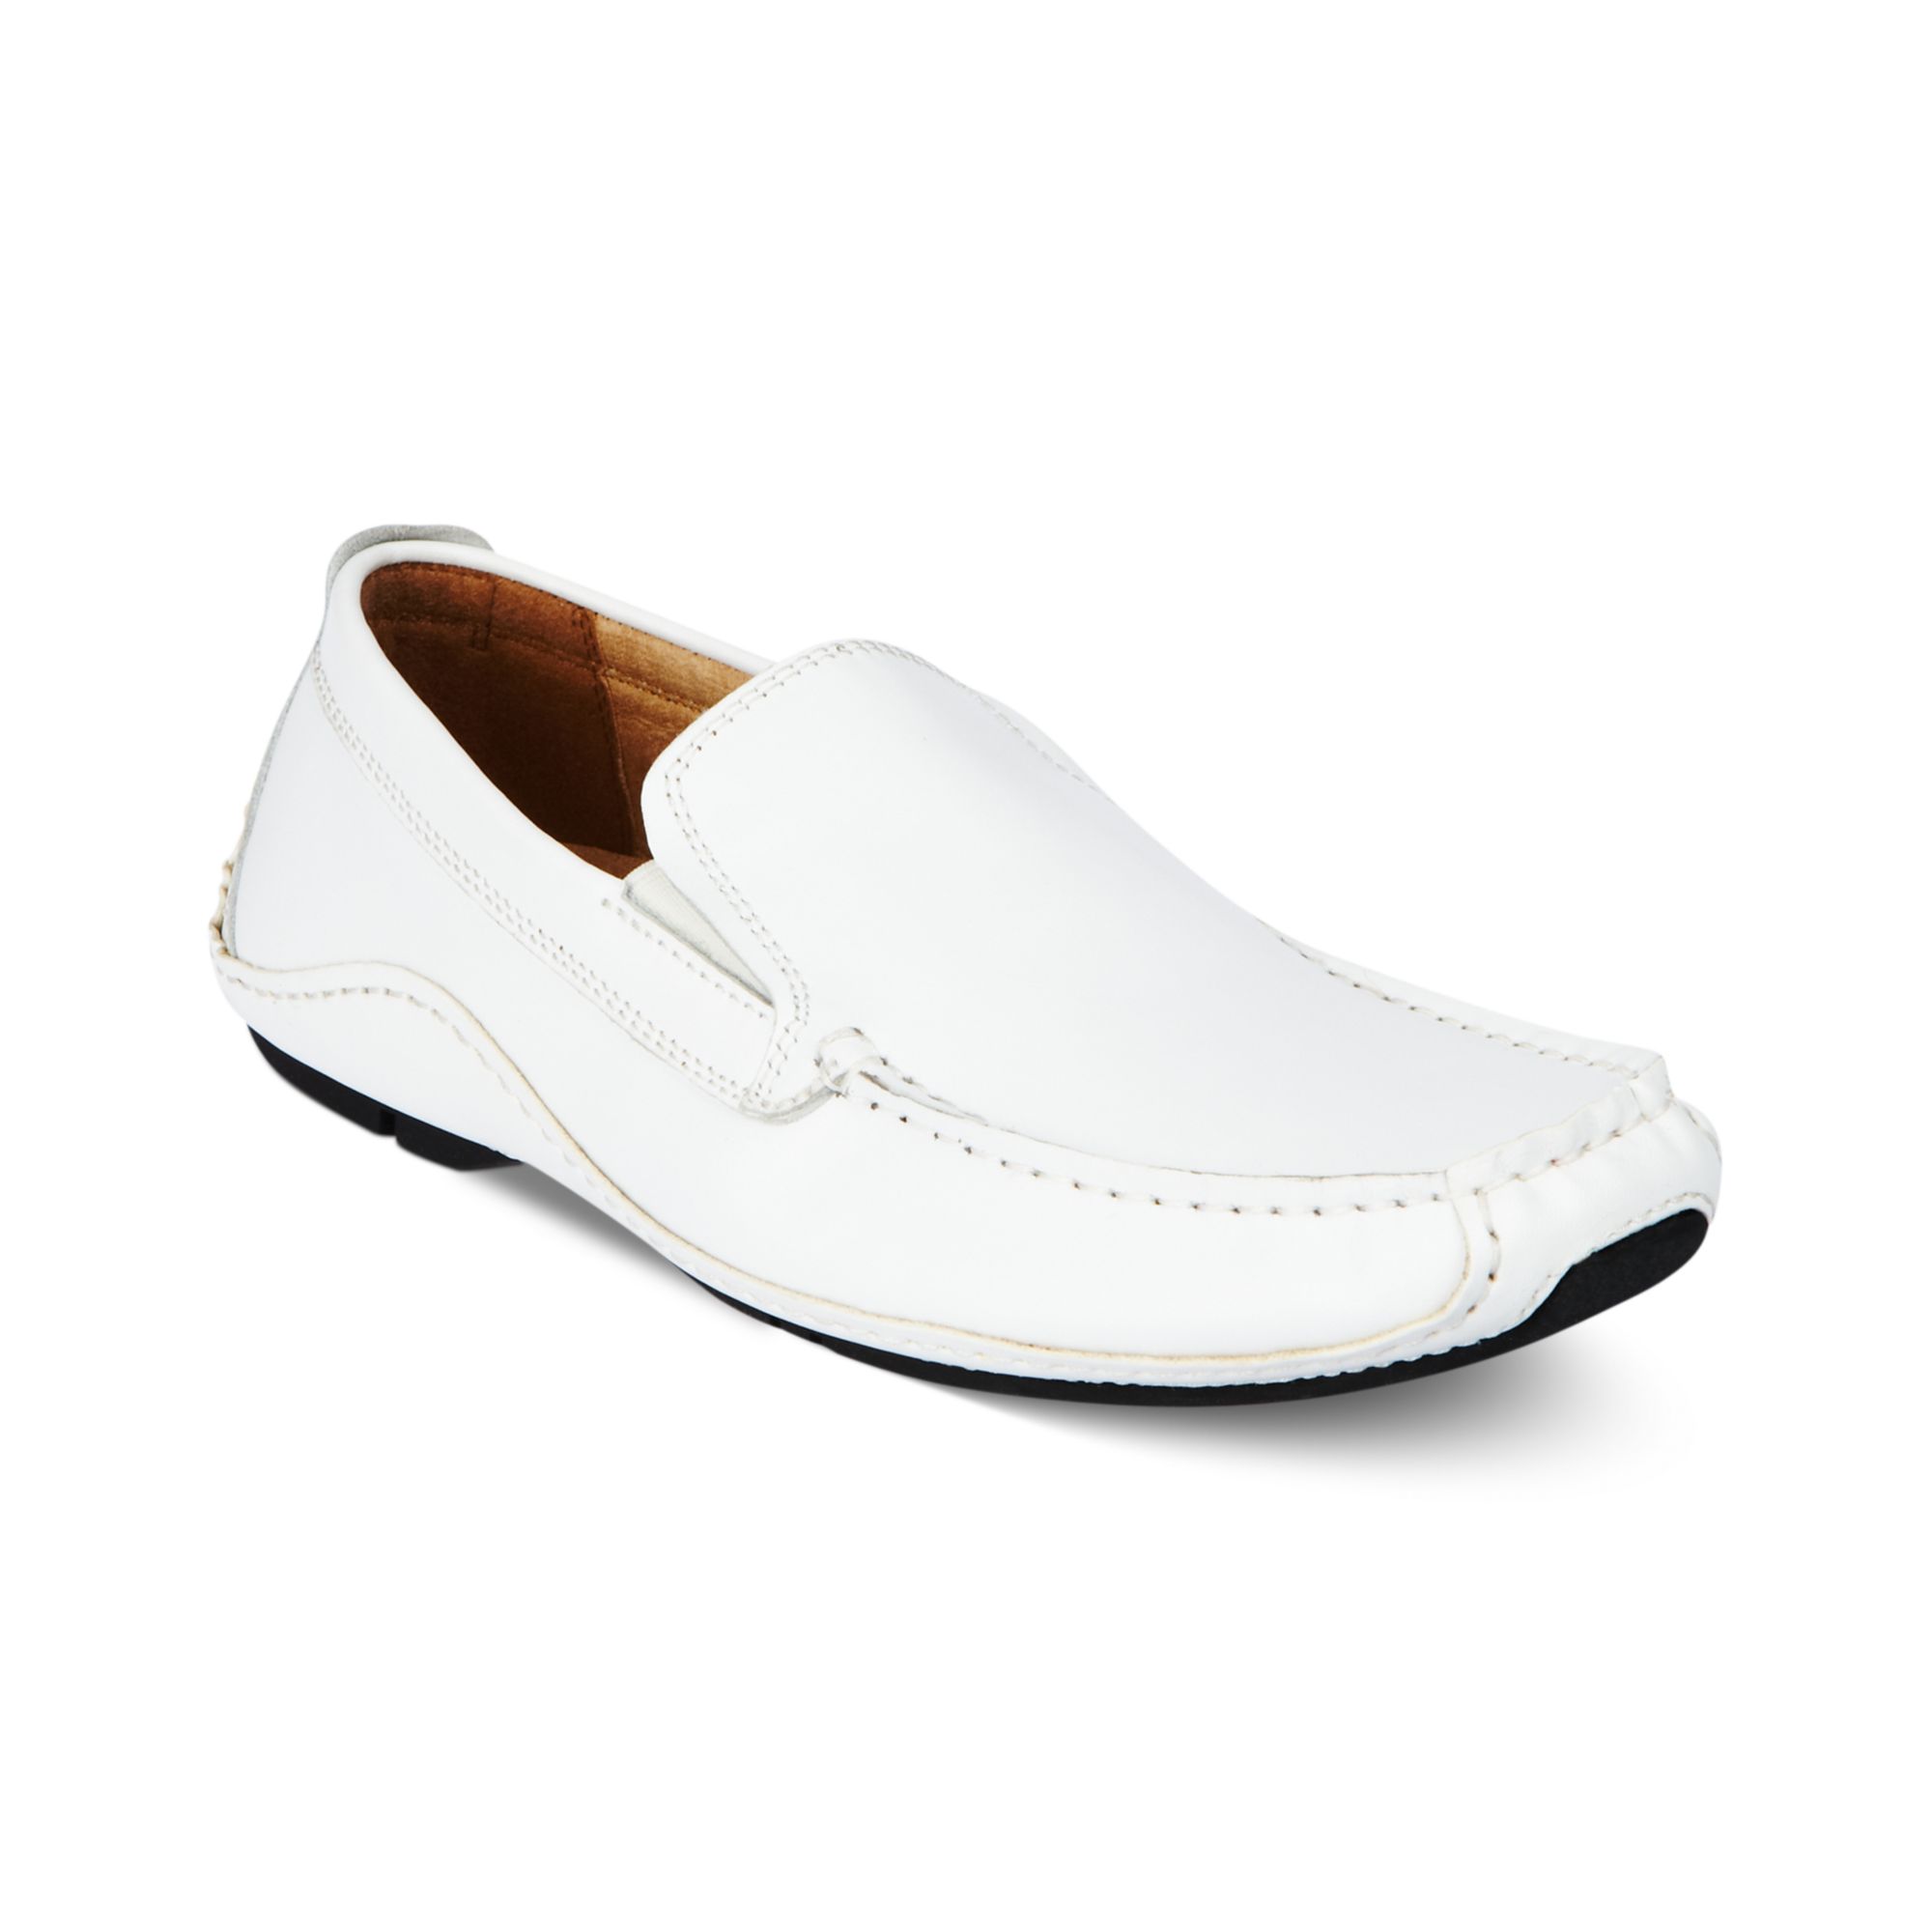 Steve Madden Rocckit Loafers in White 